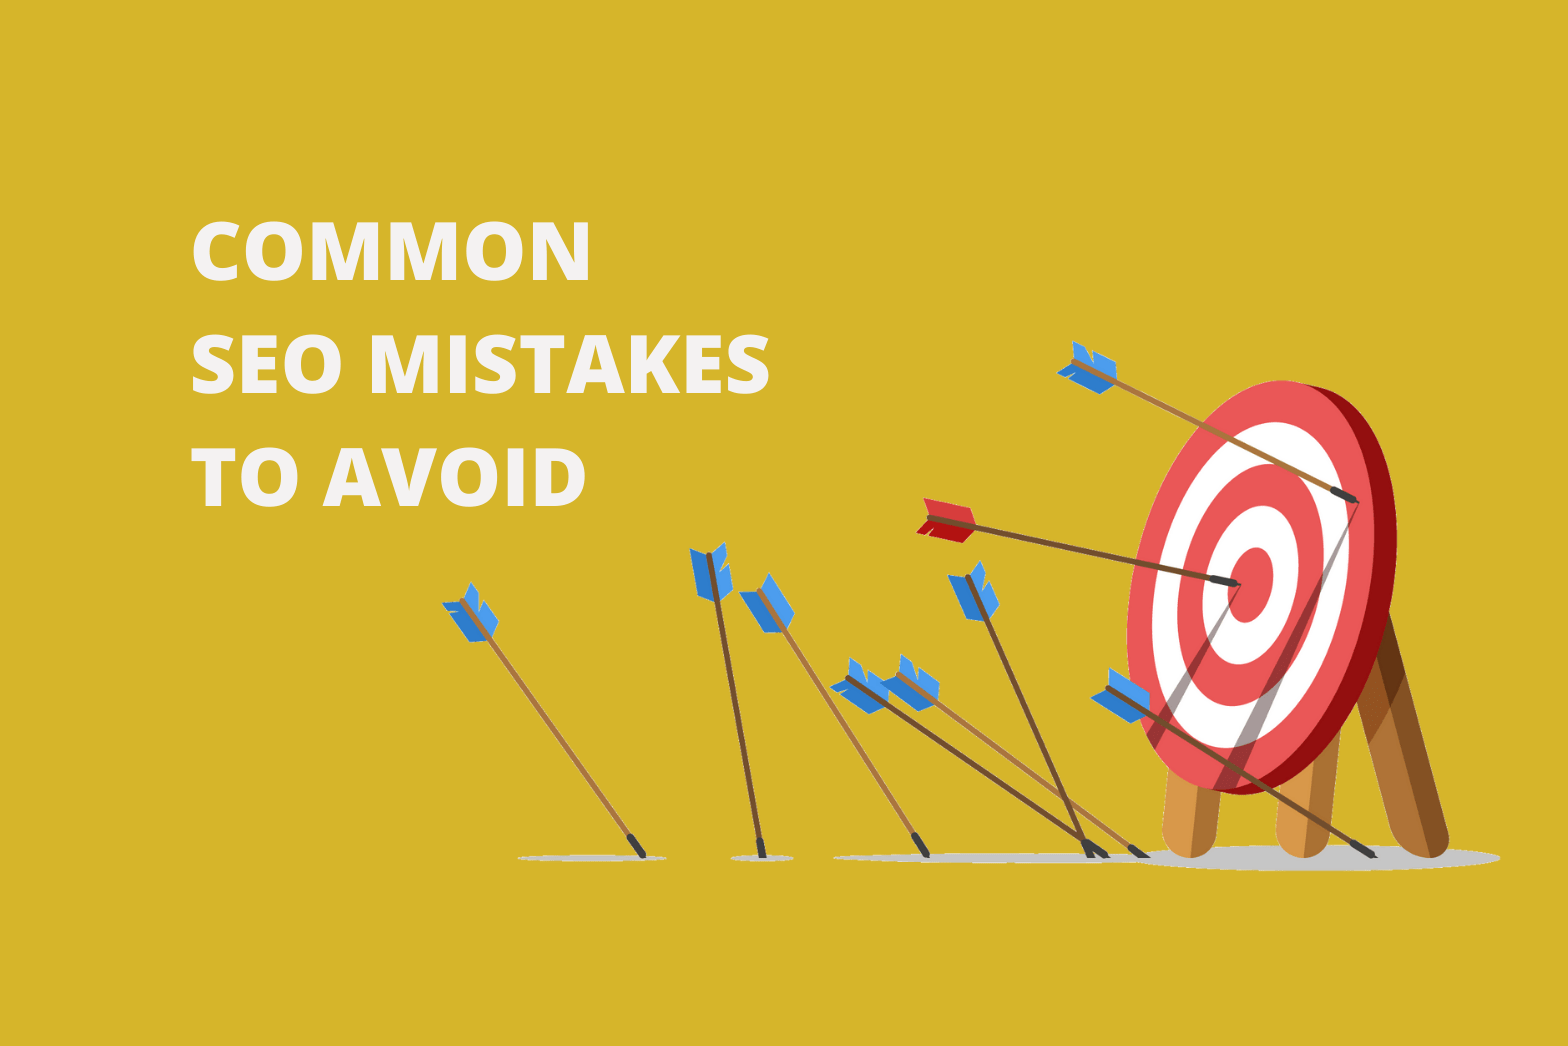 The Most Common 15 Mistakes Found While Performing SEO